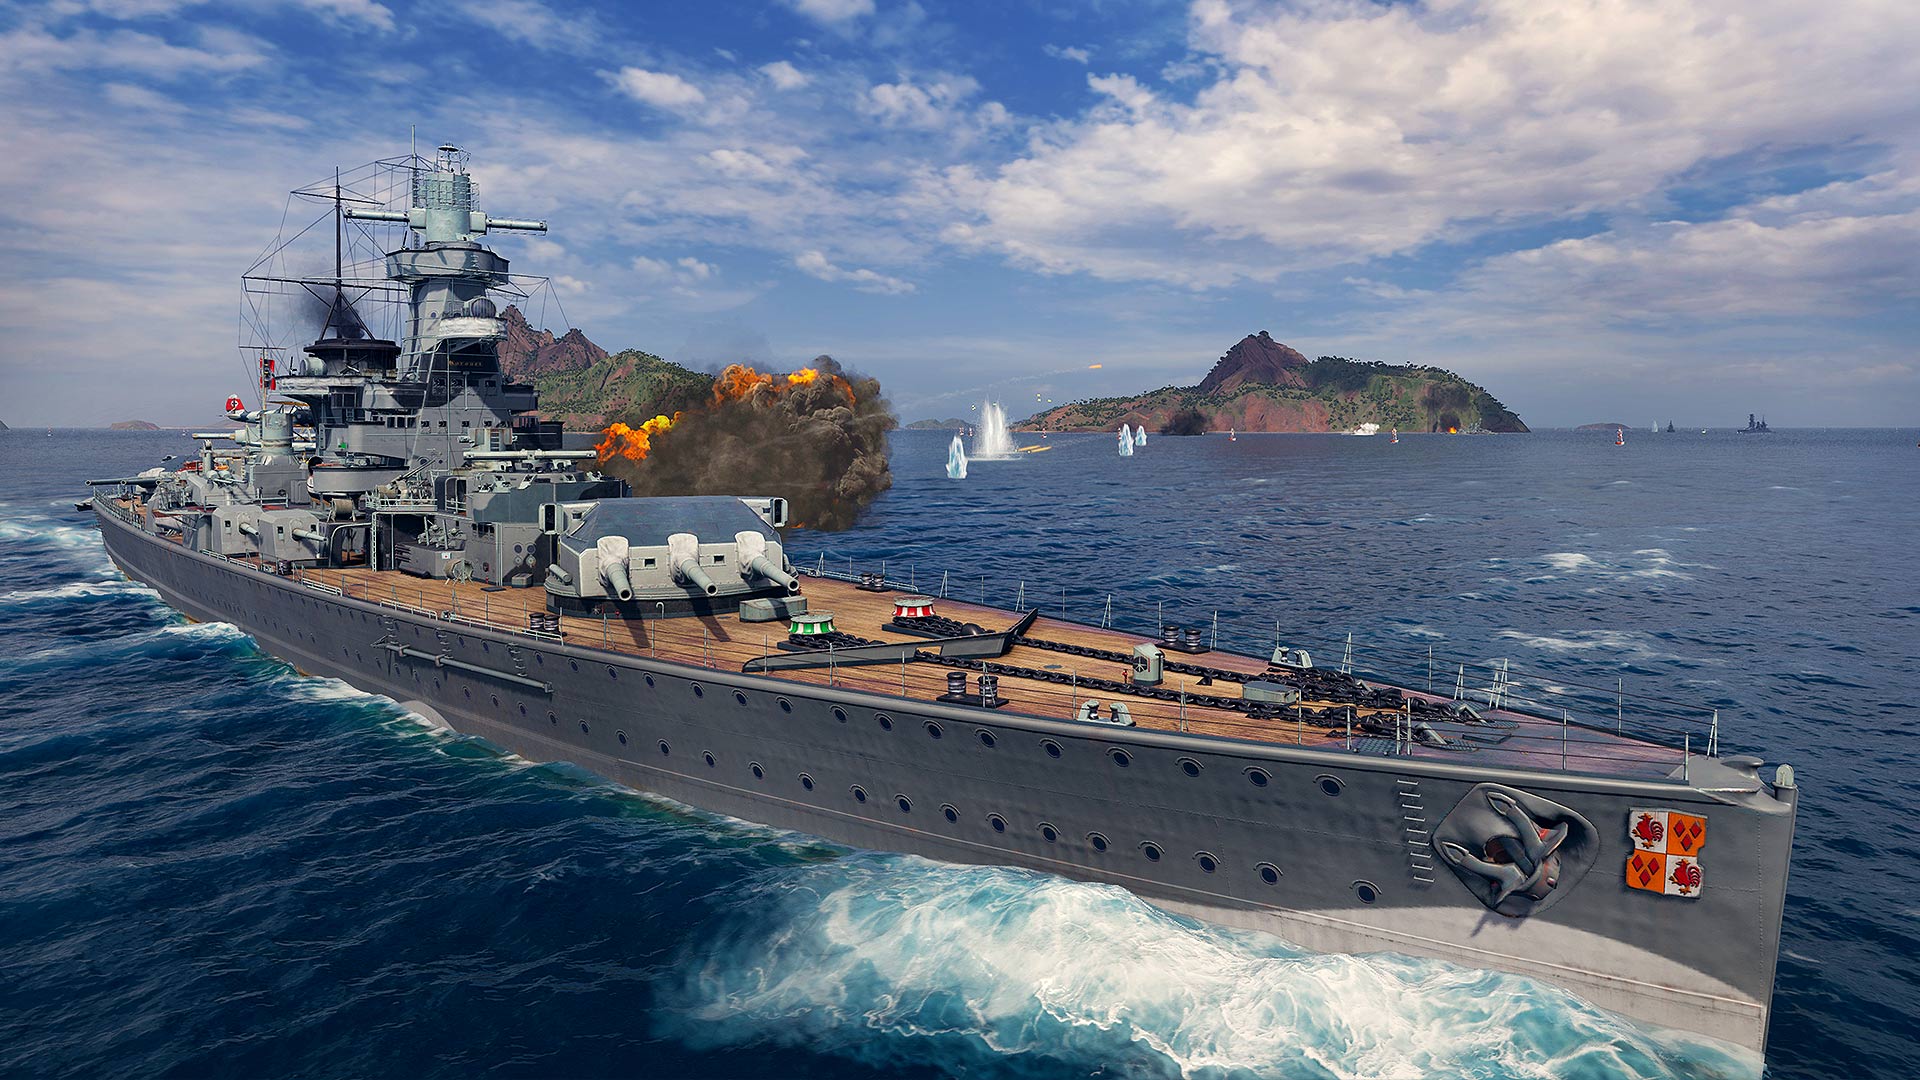 world of warships: legends ps4 update